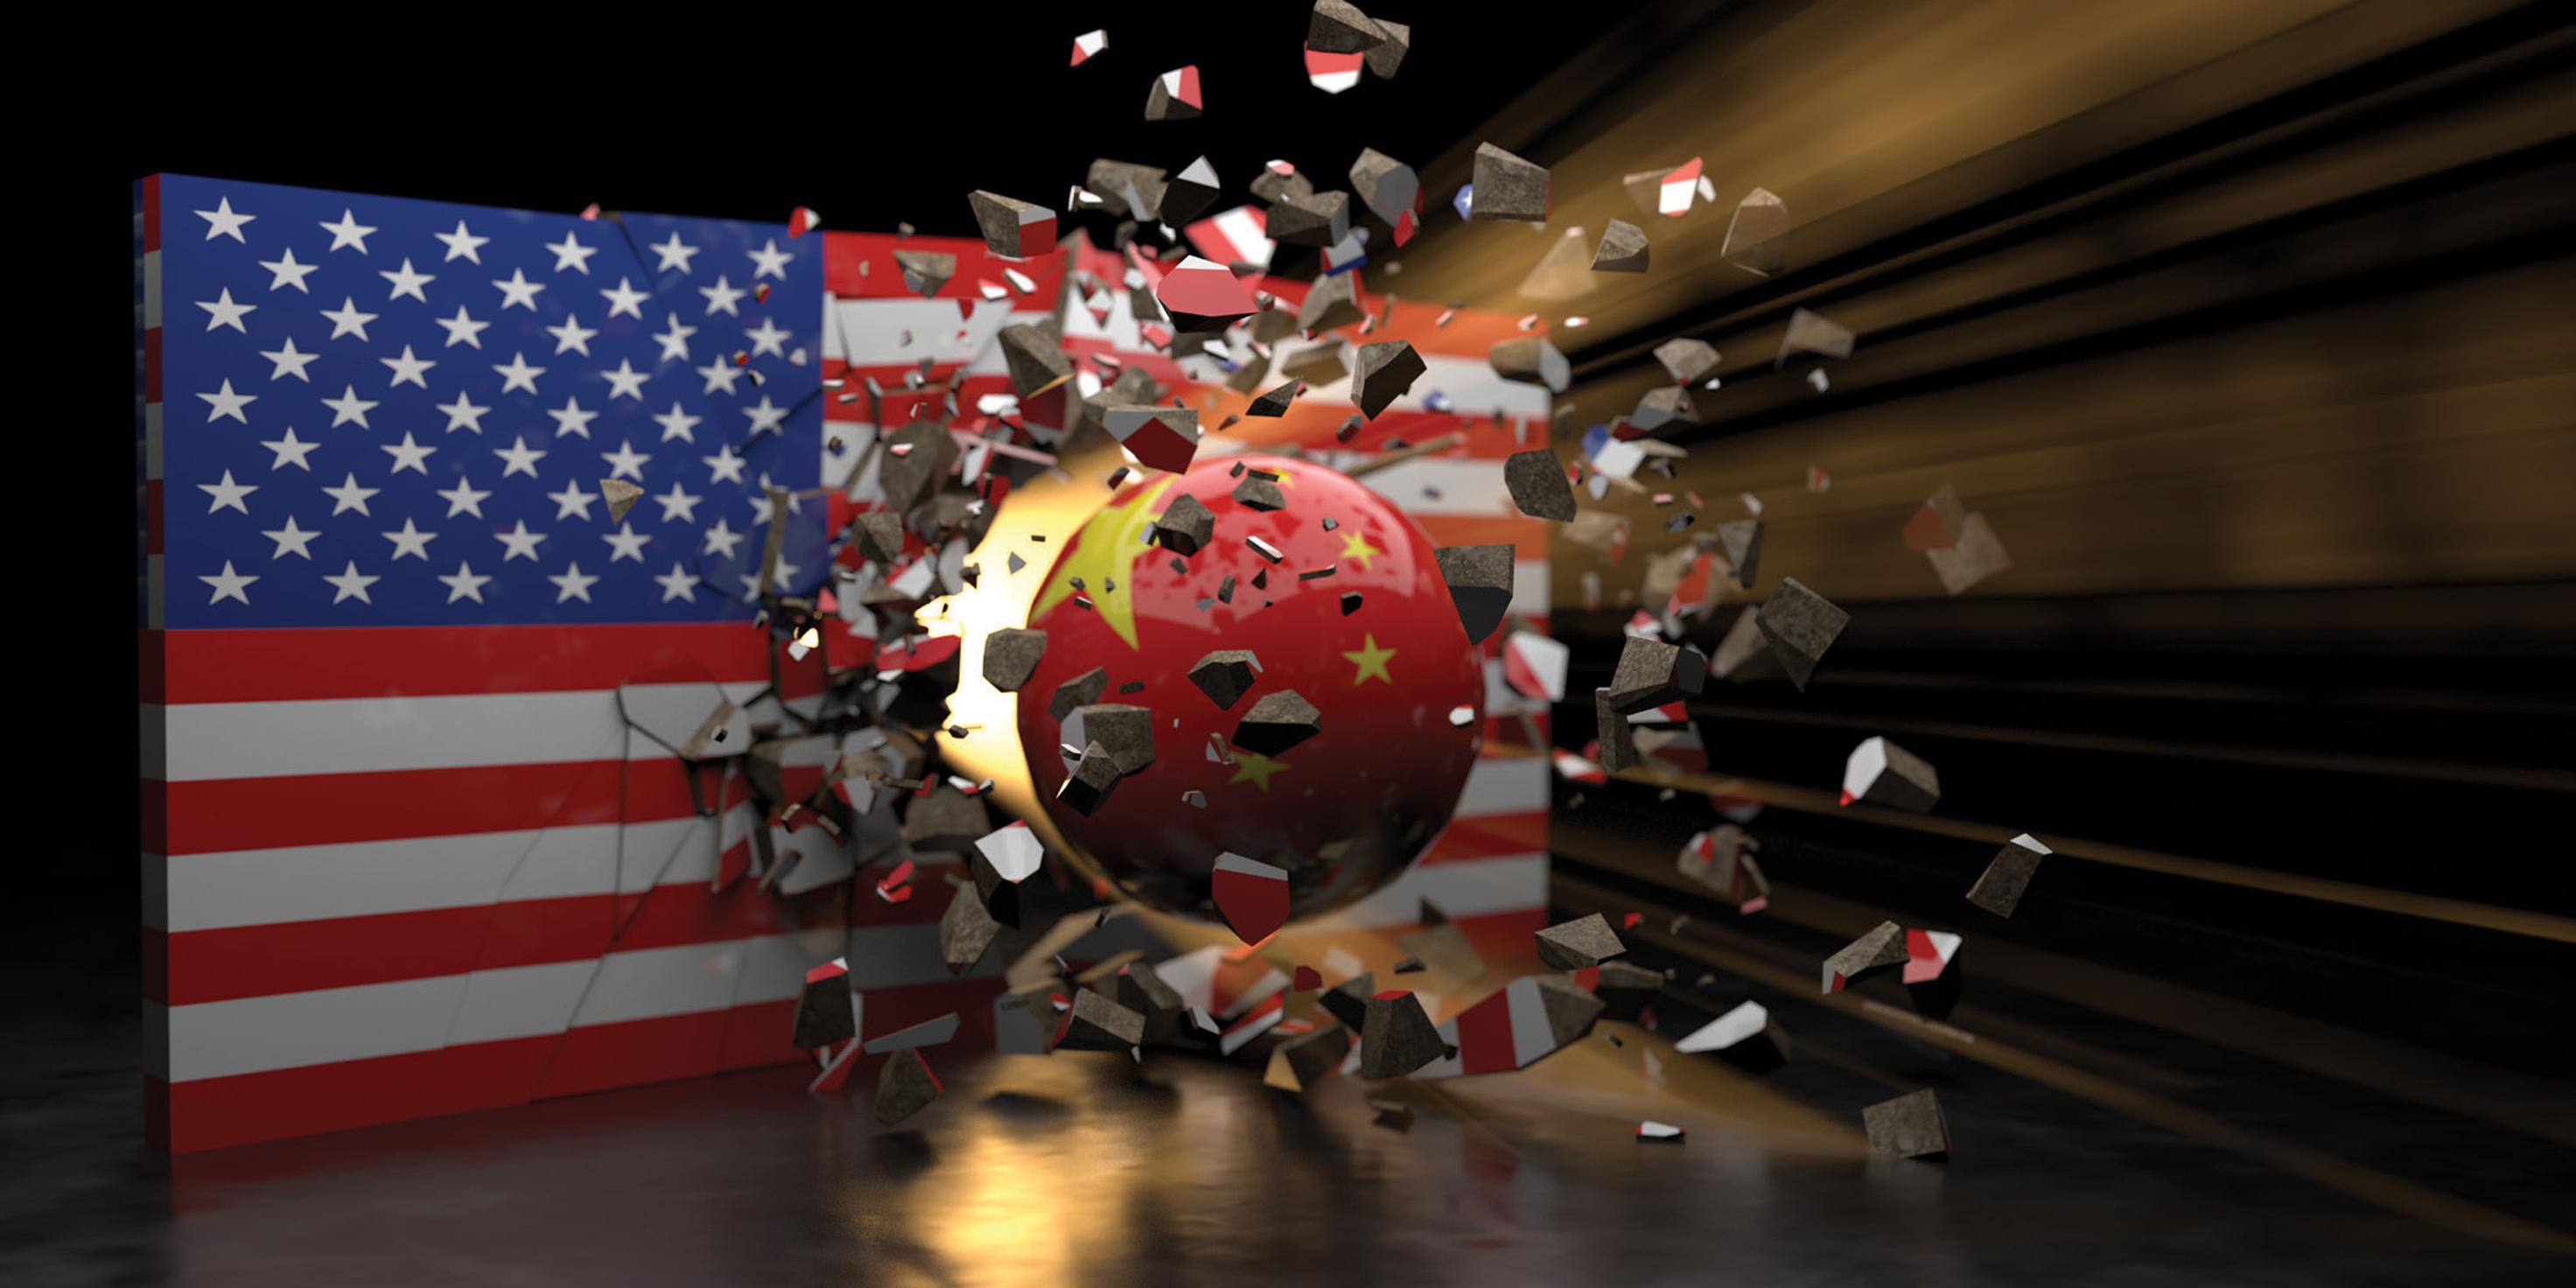 What Are the Challenges to Conflict Resolution in the U.S.-China Rivalry?